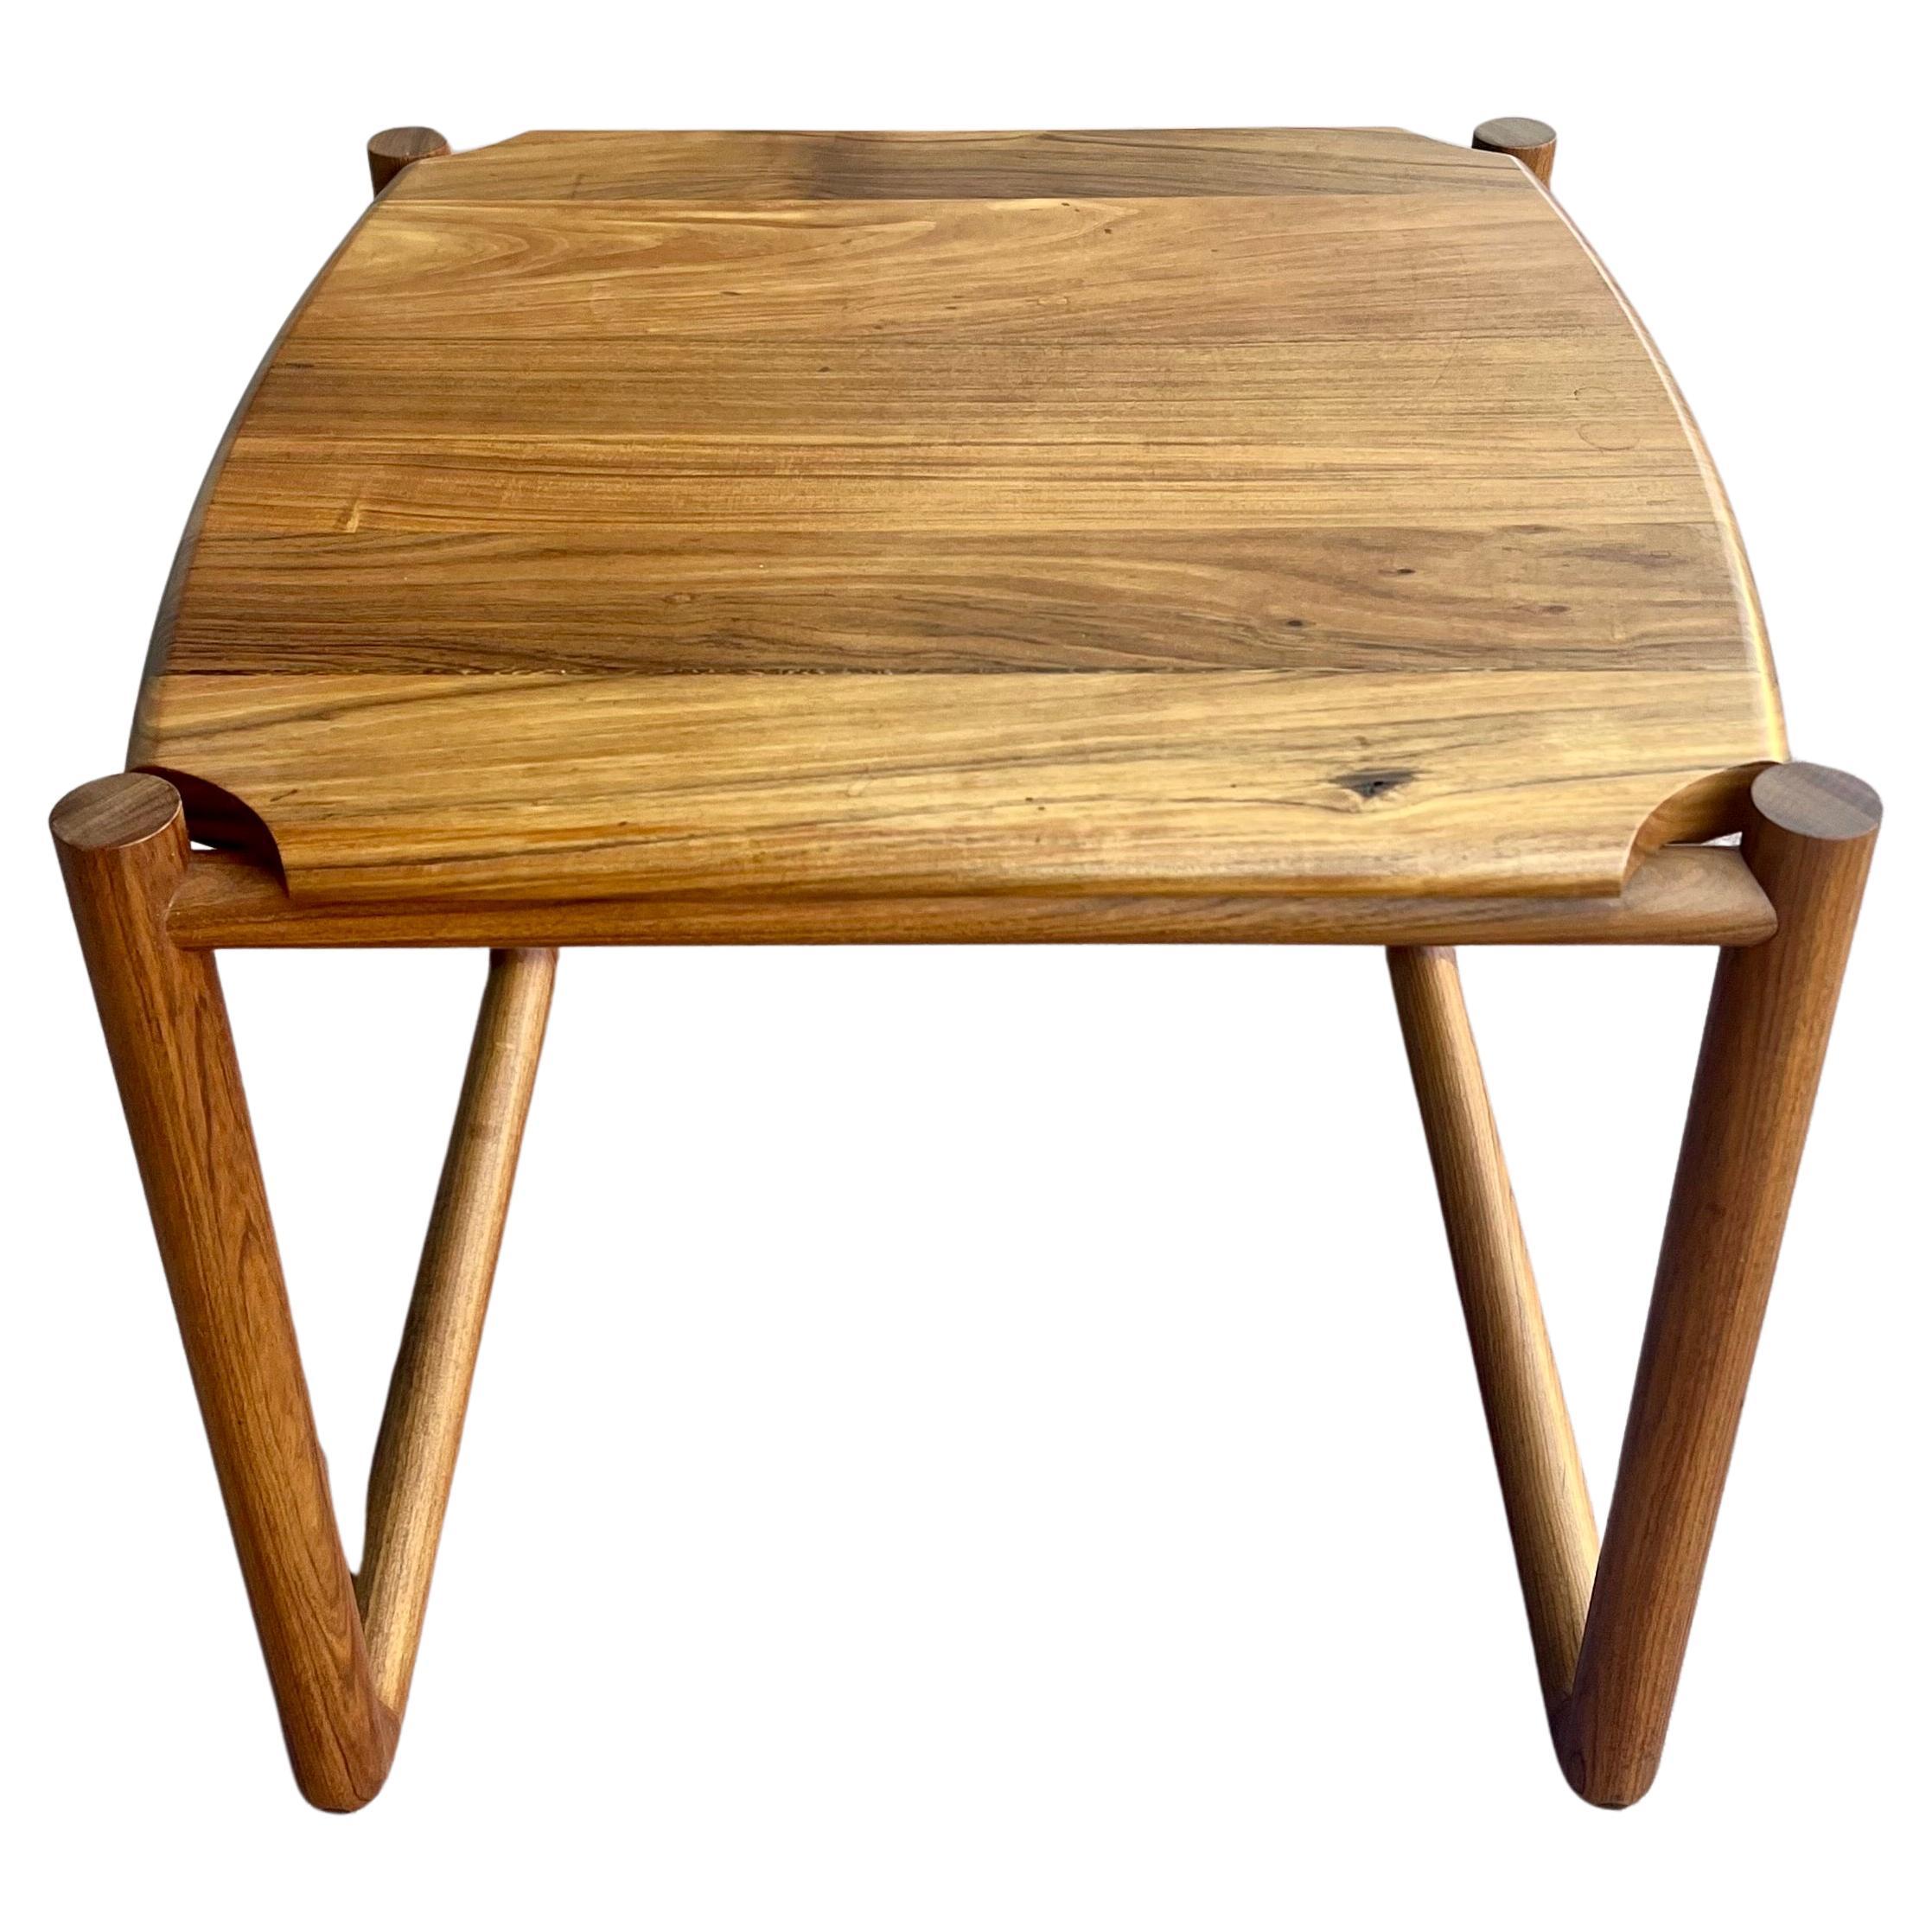 California Design solid walnut end table circa 1980's beautiful craftsmanship and quality circa 1980's stamped at the bottom, by Pat Warner of San Diego Woodworkers Association. Beautiful solid great craftsmanship one of a kind.